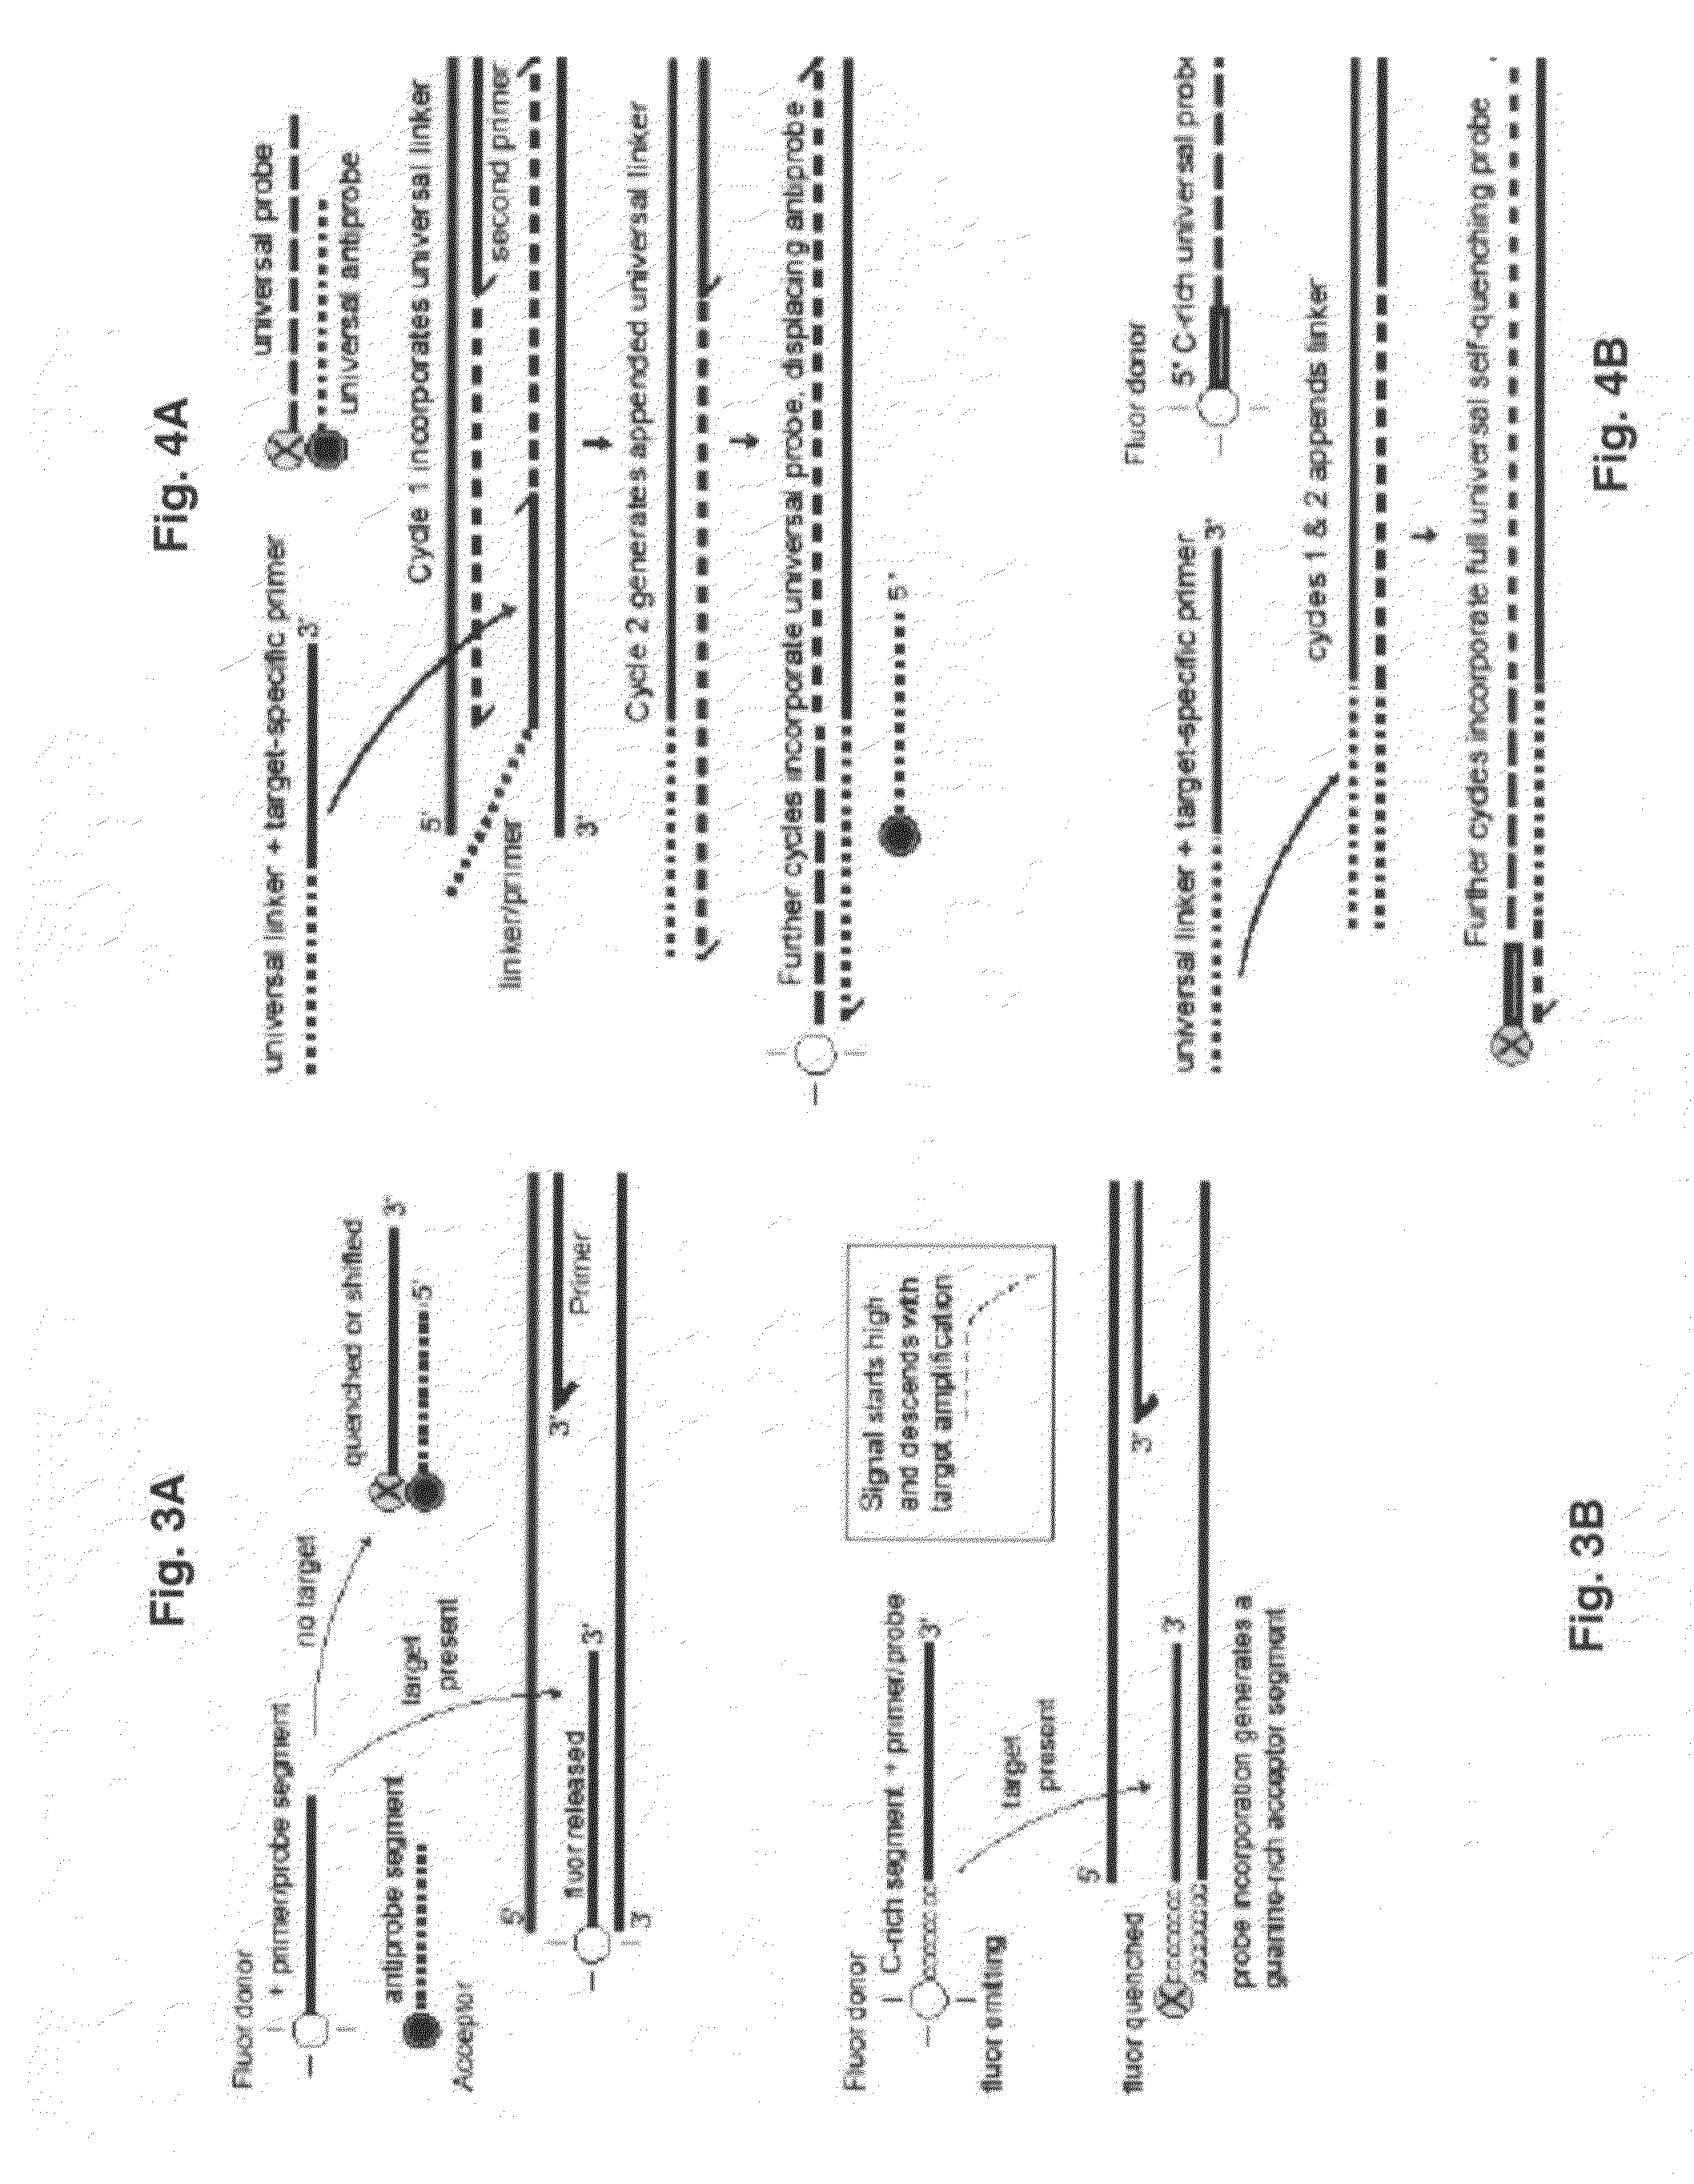 Probe-antiprobe compositions and methods for DNA or RNA detection